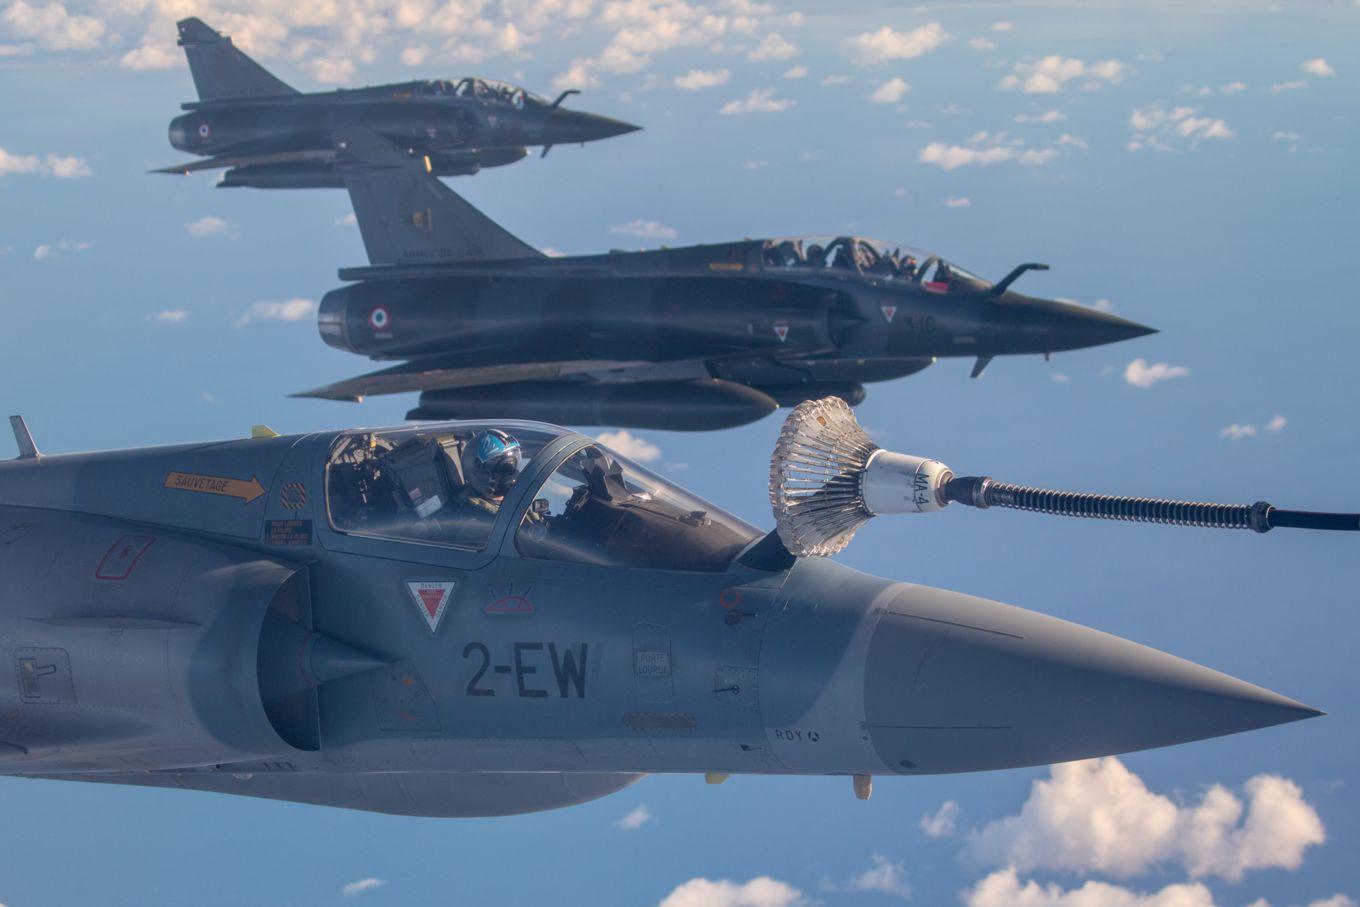 Image shows three French Mirage 2000 aircraft flying while one is being refuelled.